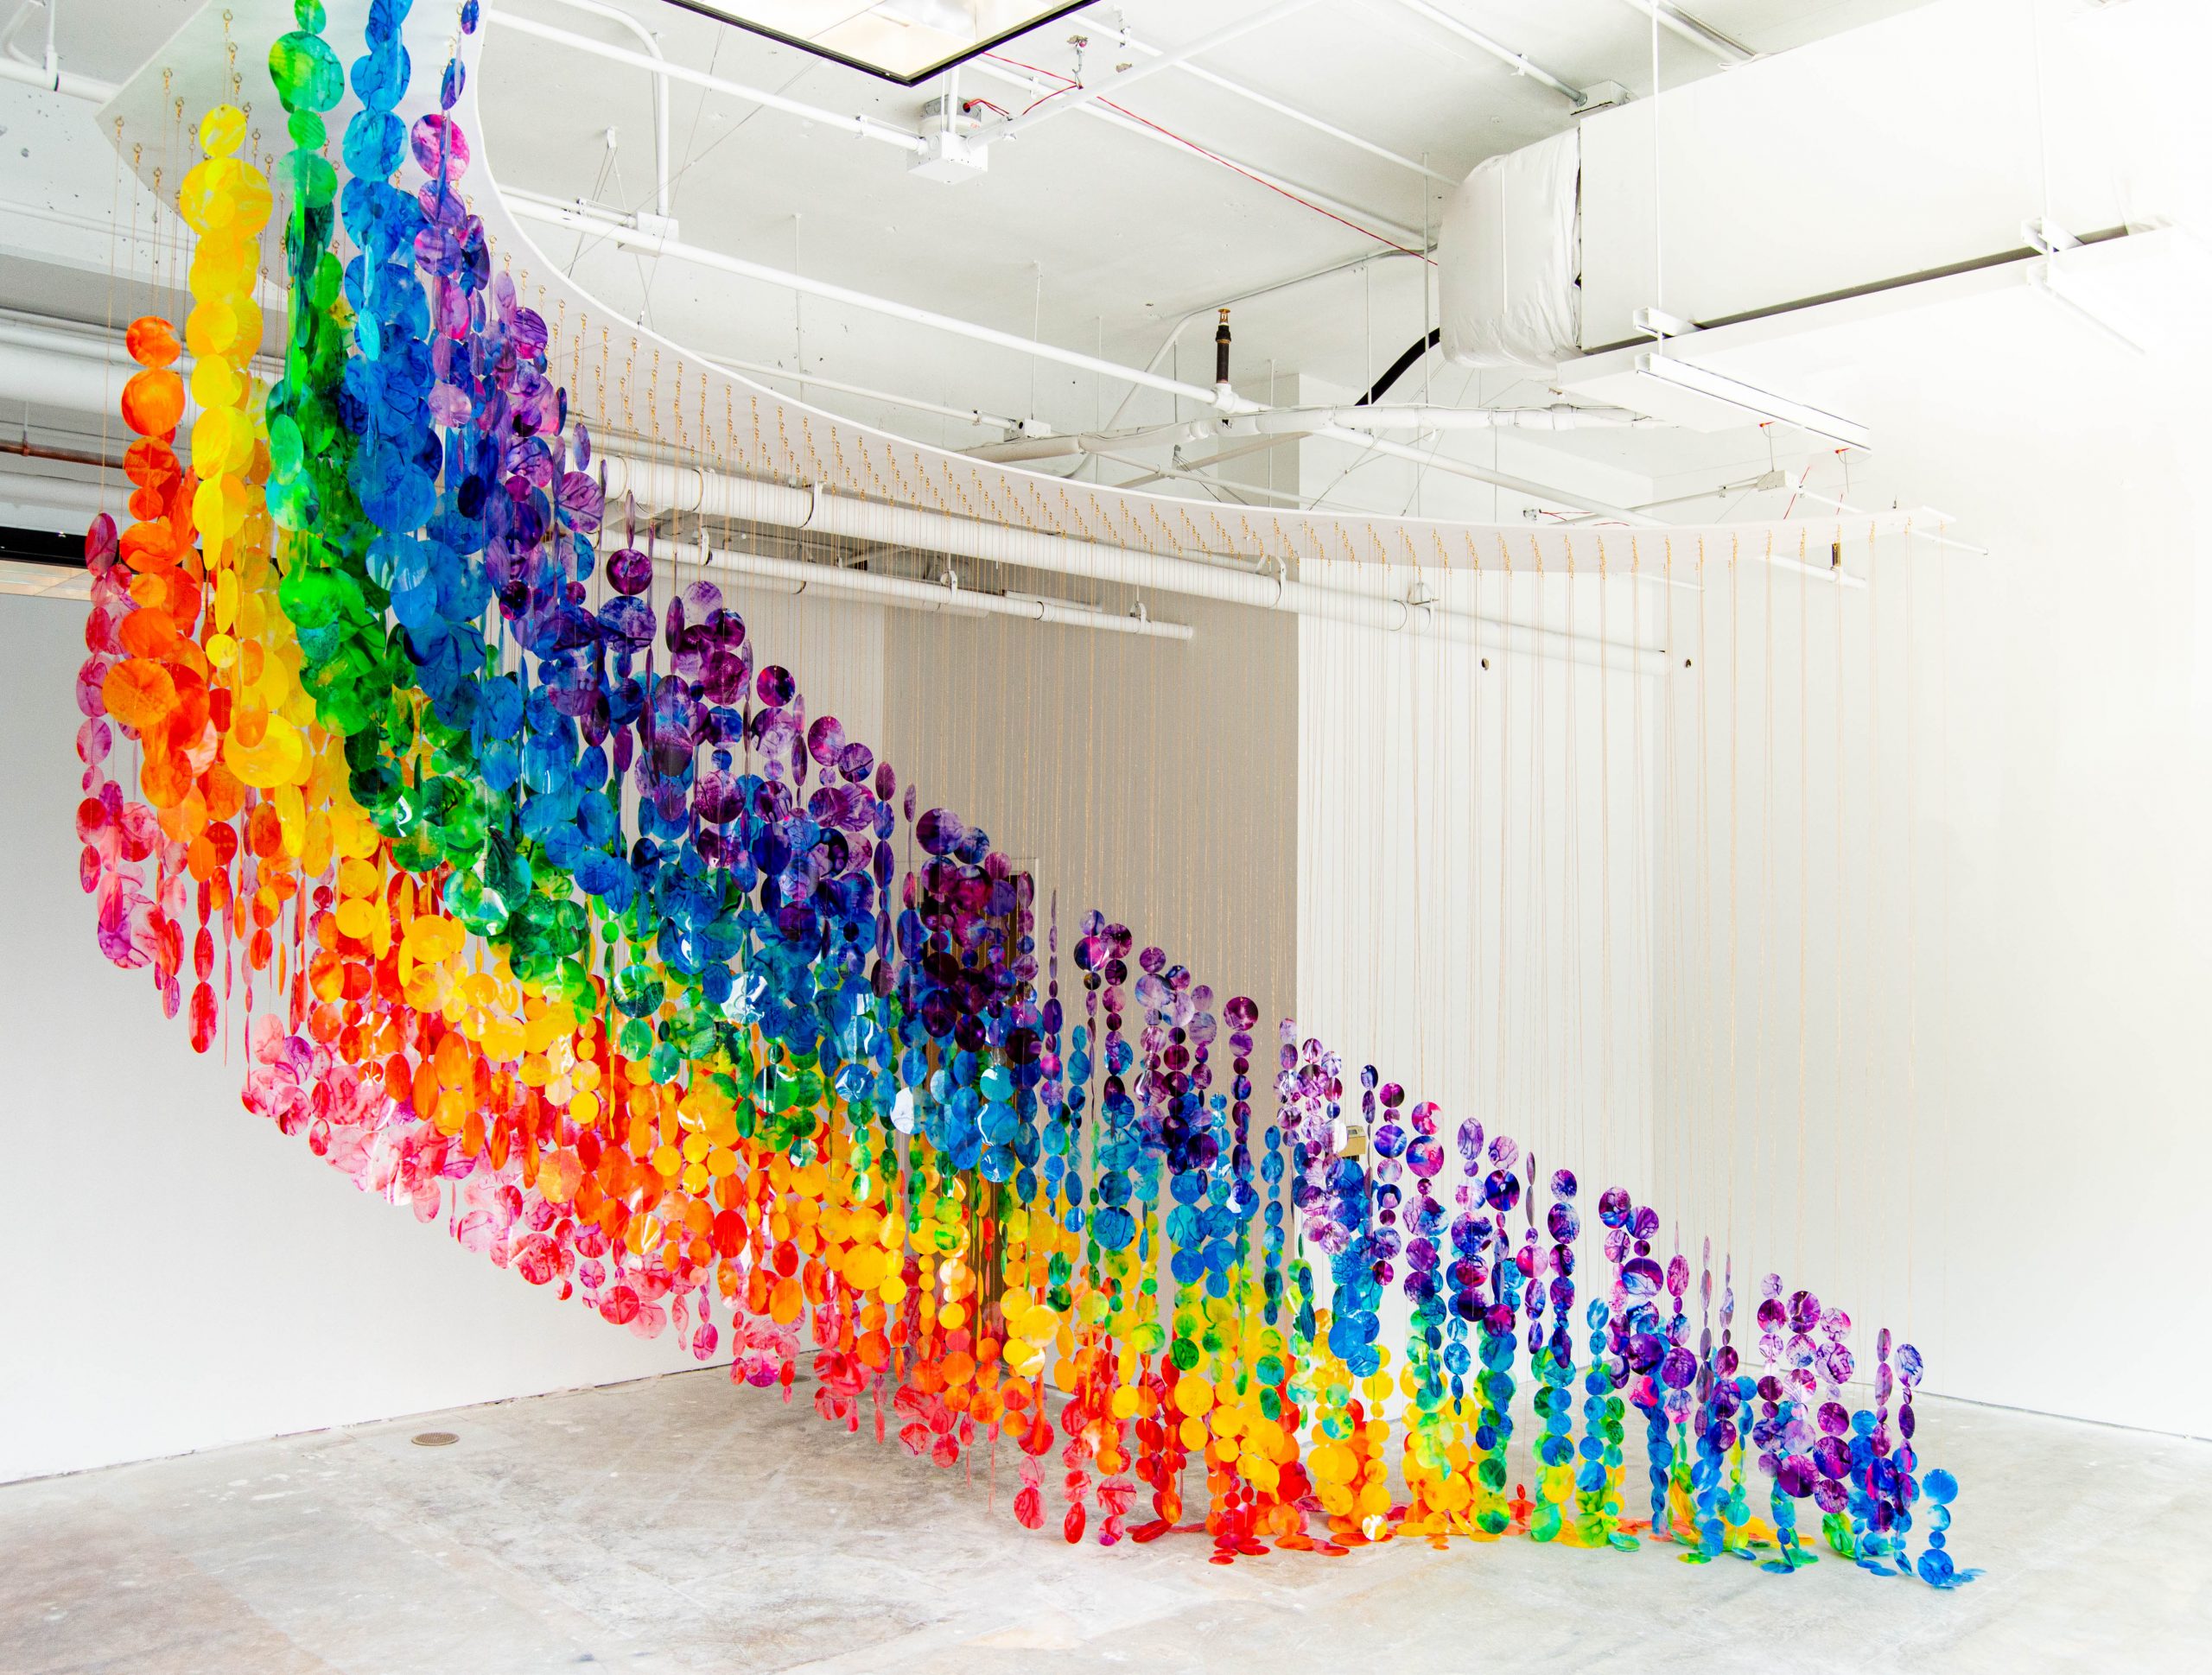 Ceiling Suspended Kinetic Rainbow Sculpture – “We Wondered If We Could Reach Its End”